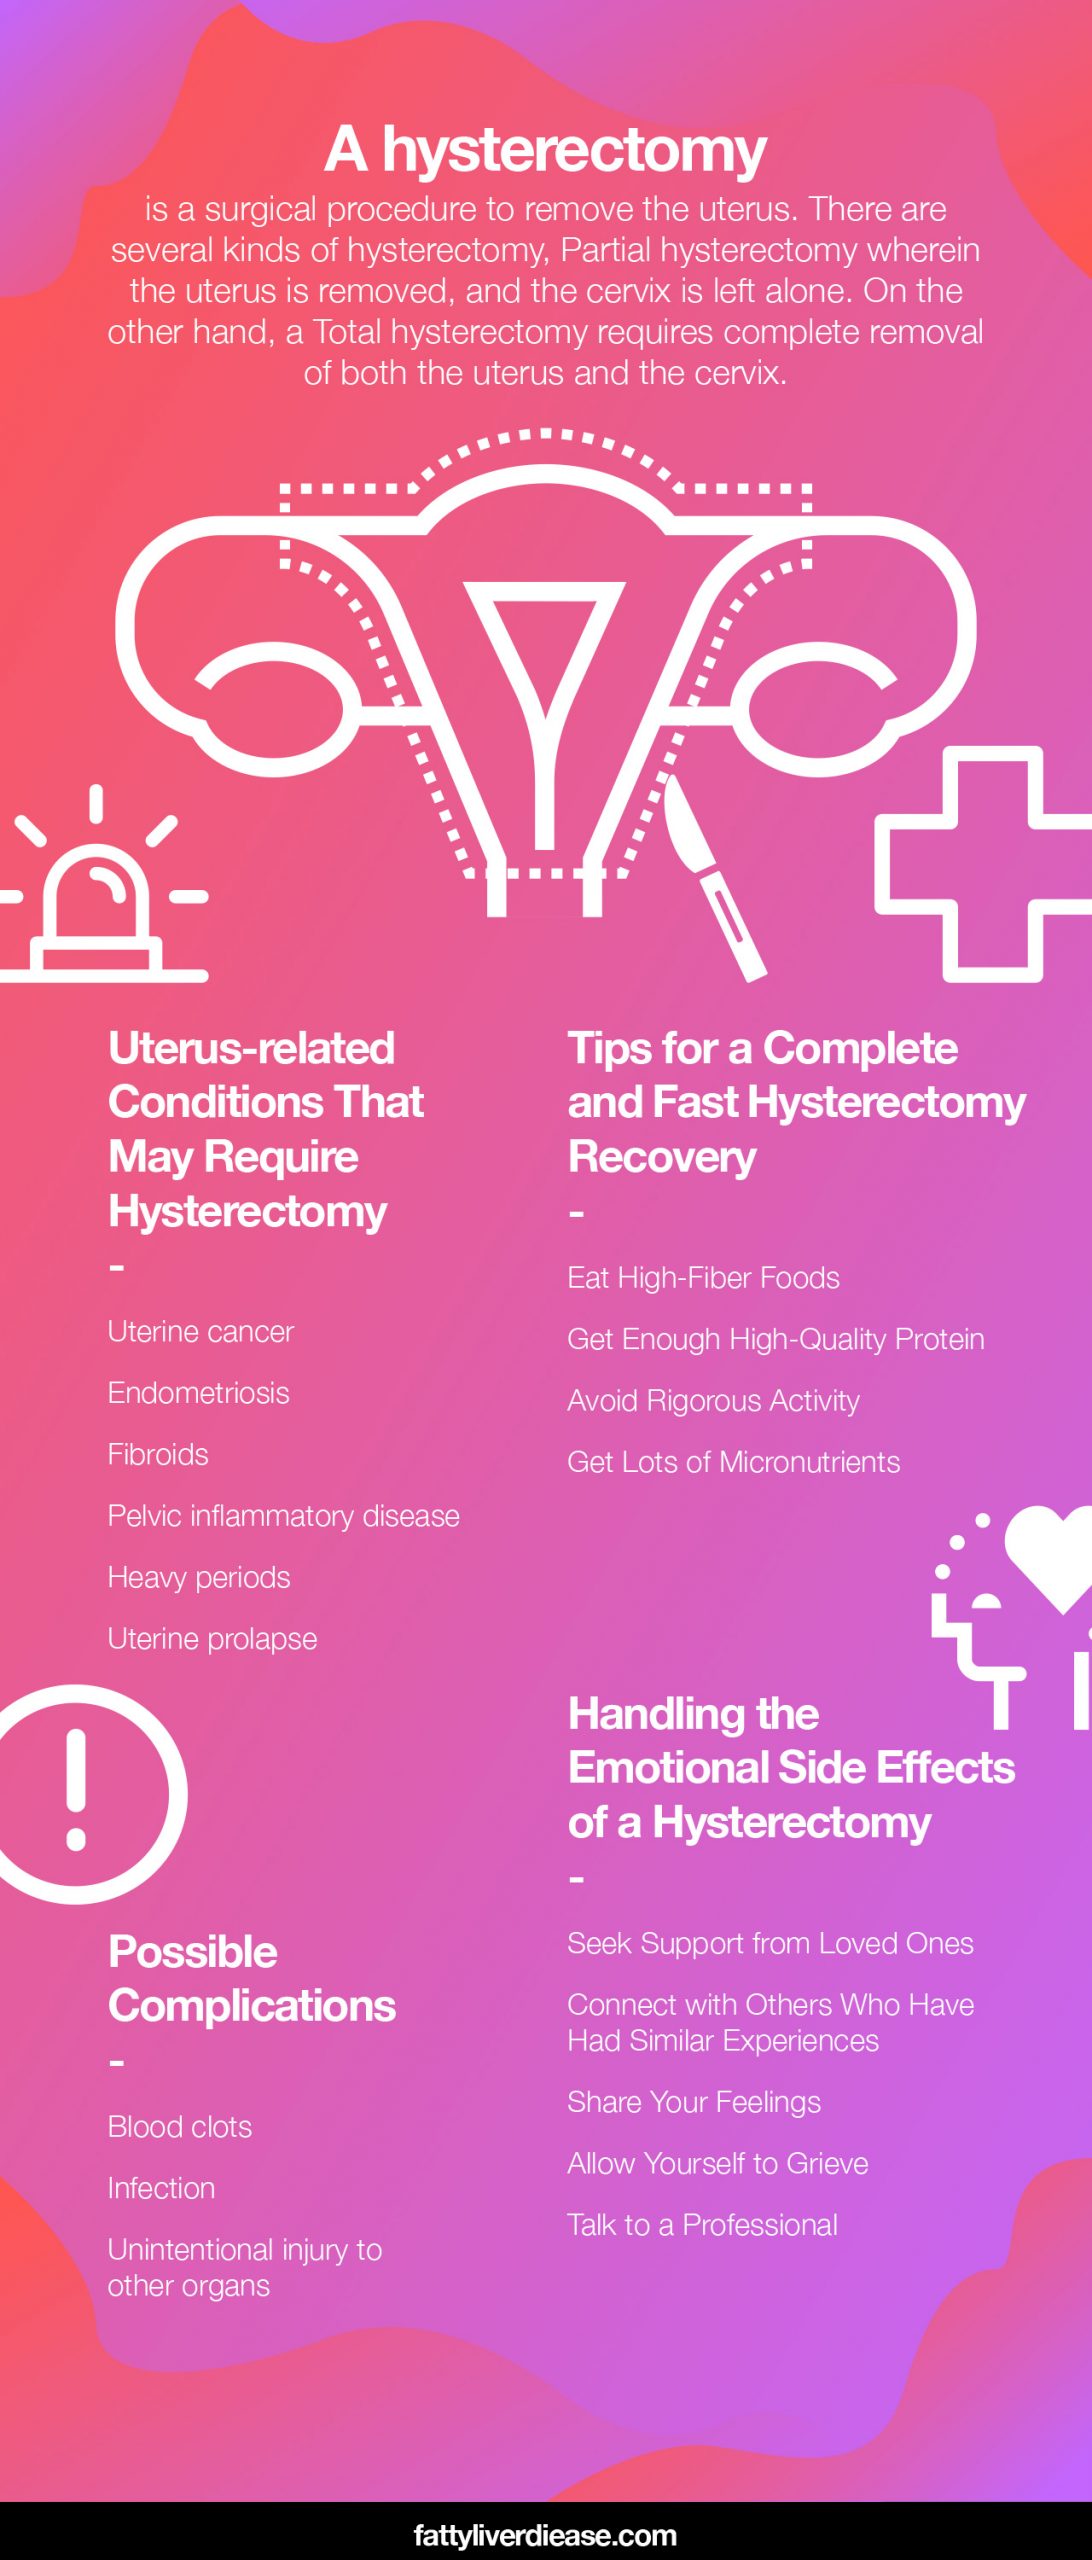 Tips for a Complete and Fast Hysterectomy Recovery